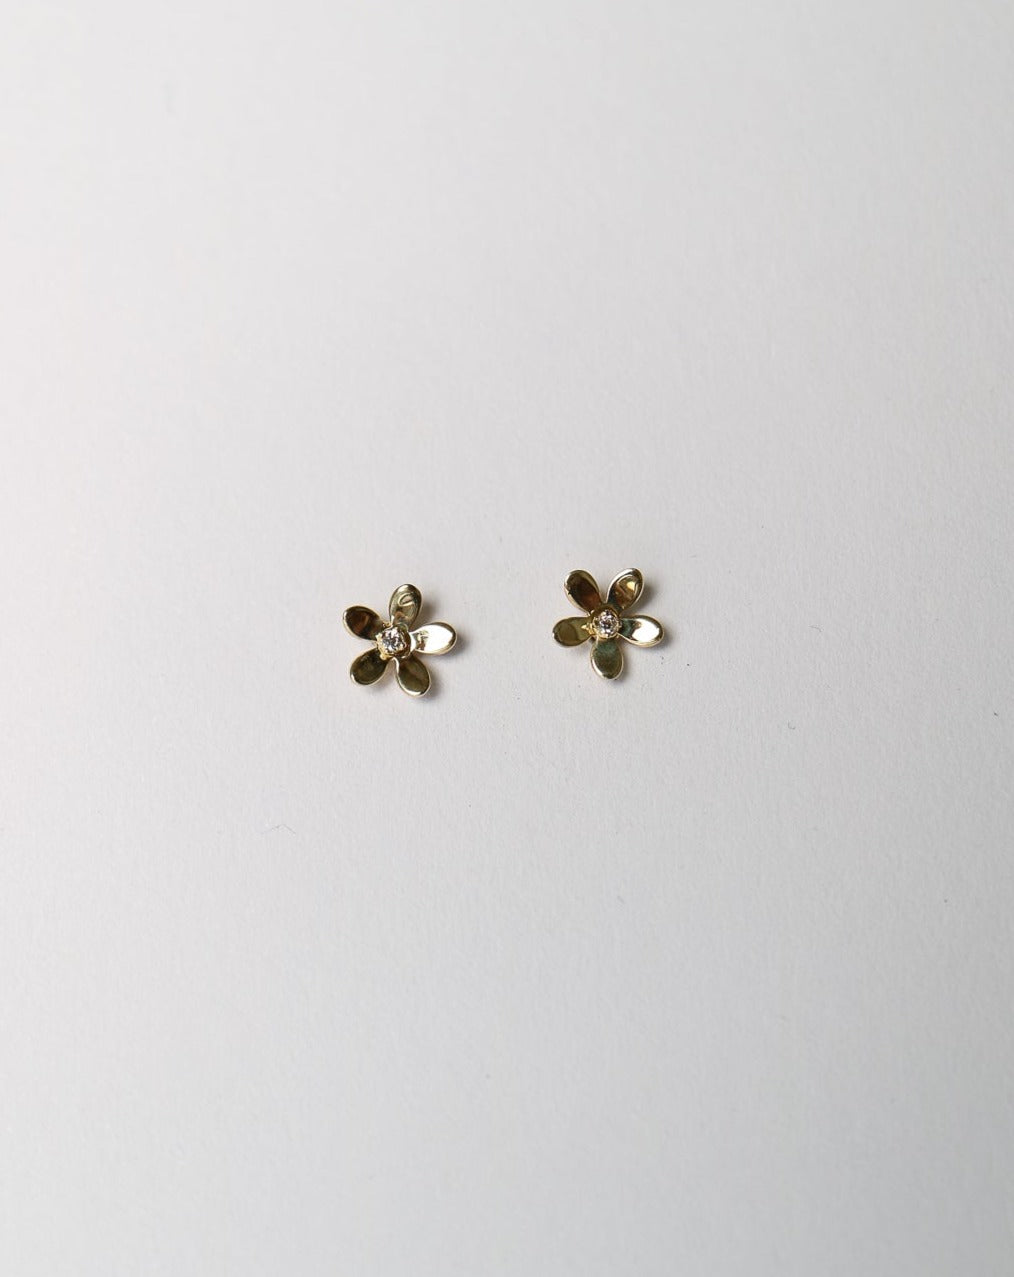 9kt gold Daisy Flower Studs Earrings by Collective & Co Jewellery South Africa